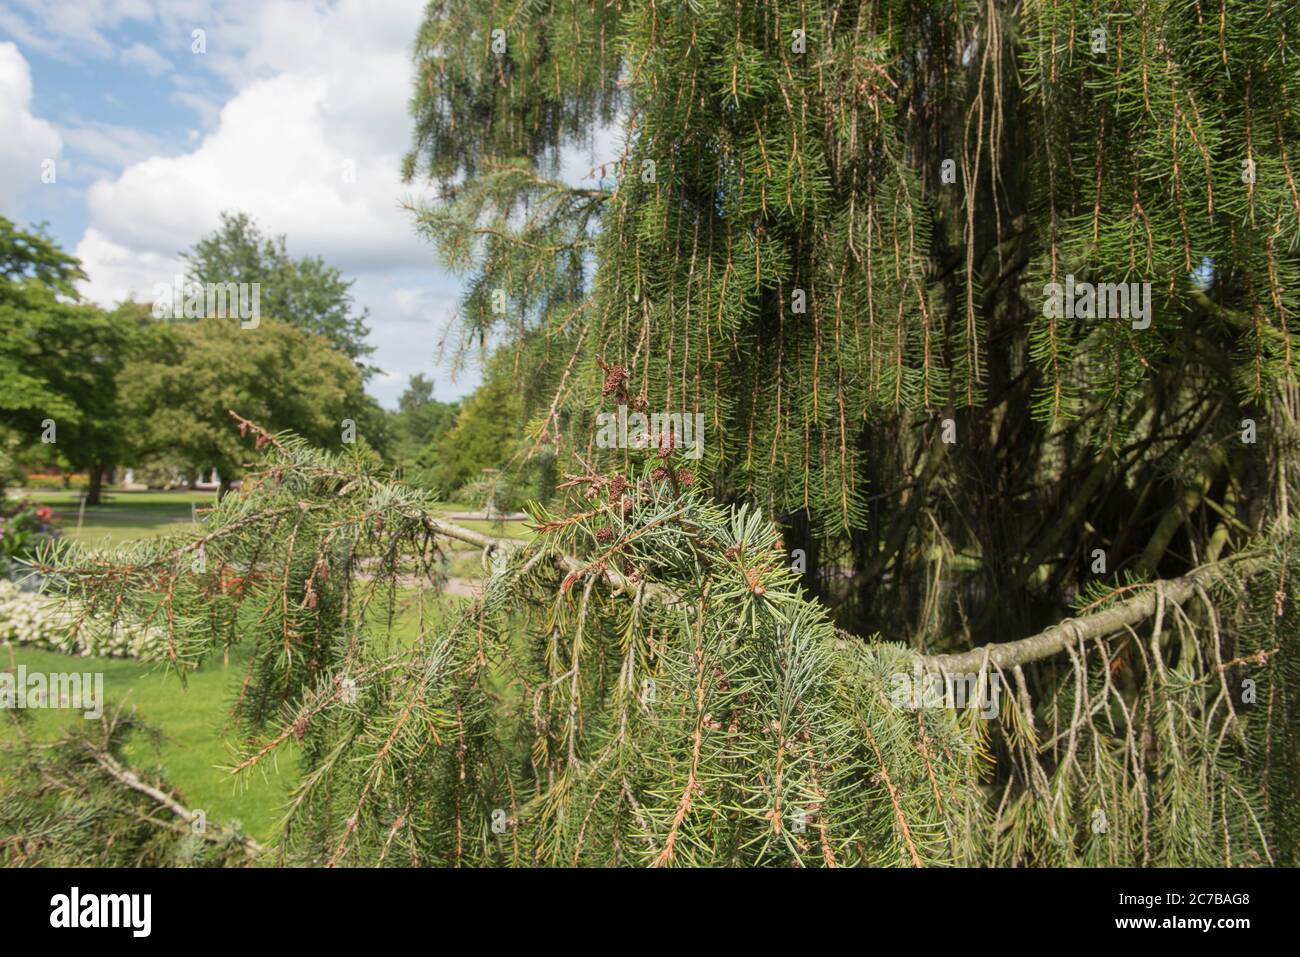 Summer Foliage of Brewer's Weeping Spruce Tree (Picea breweriana) Growing in a Garden in Rural Devon, England, UK Stock Photo